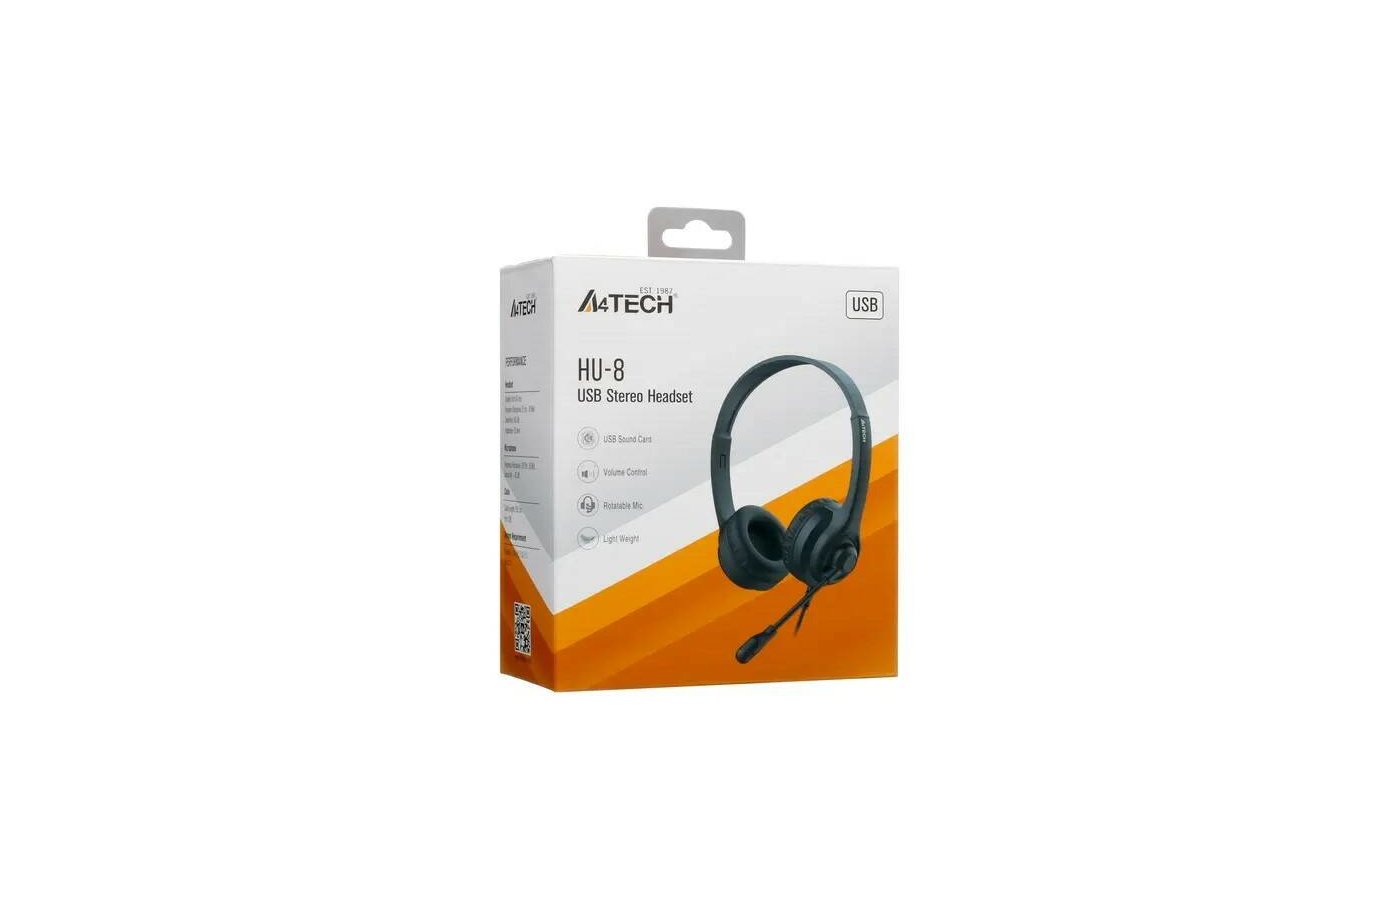 A4Tech HU-8 USB Stereo Headset - High-Performance DSP Stereo with Rotatable Mic